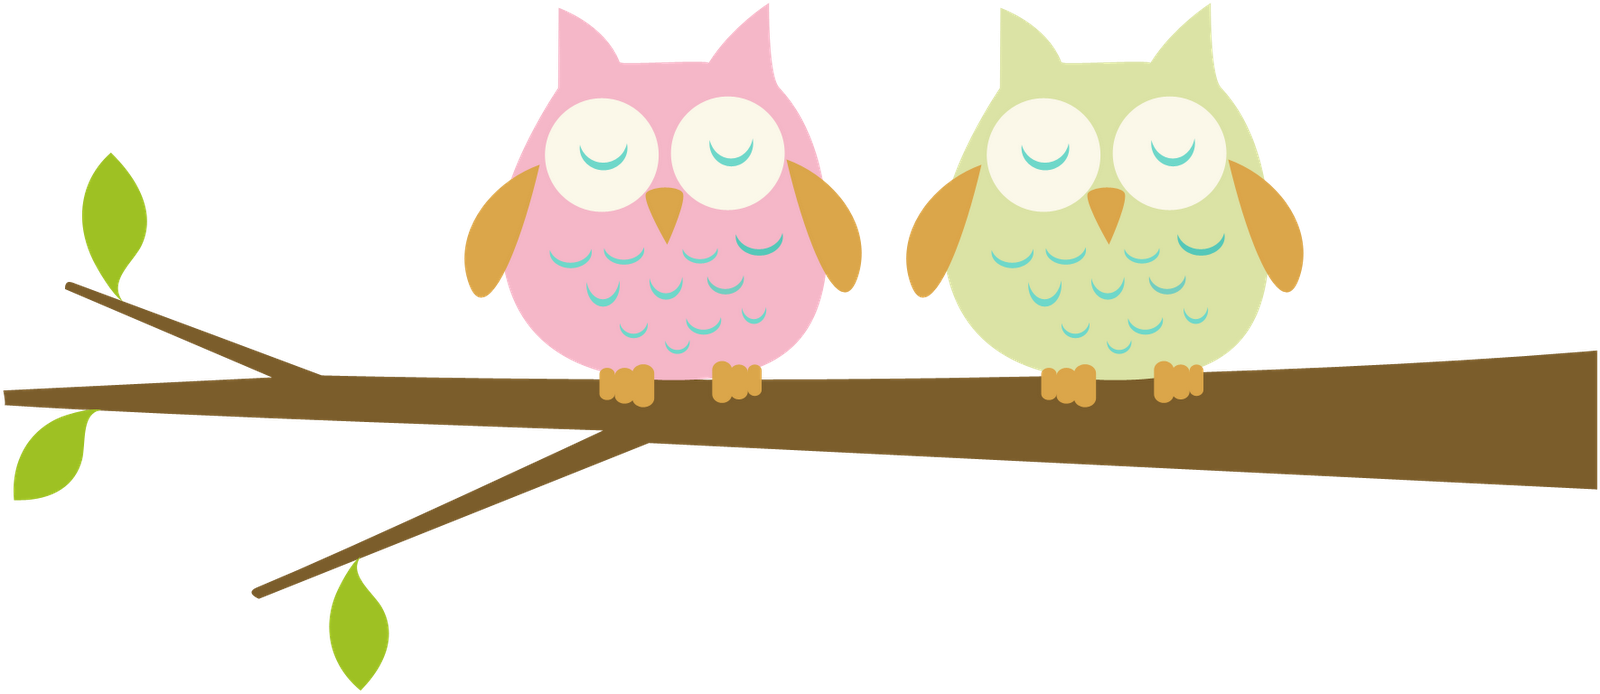 Trends For > Owl Tree Branch Clip Art